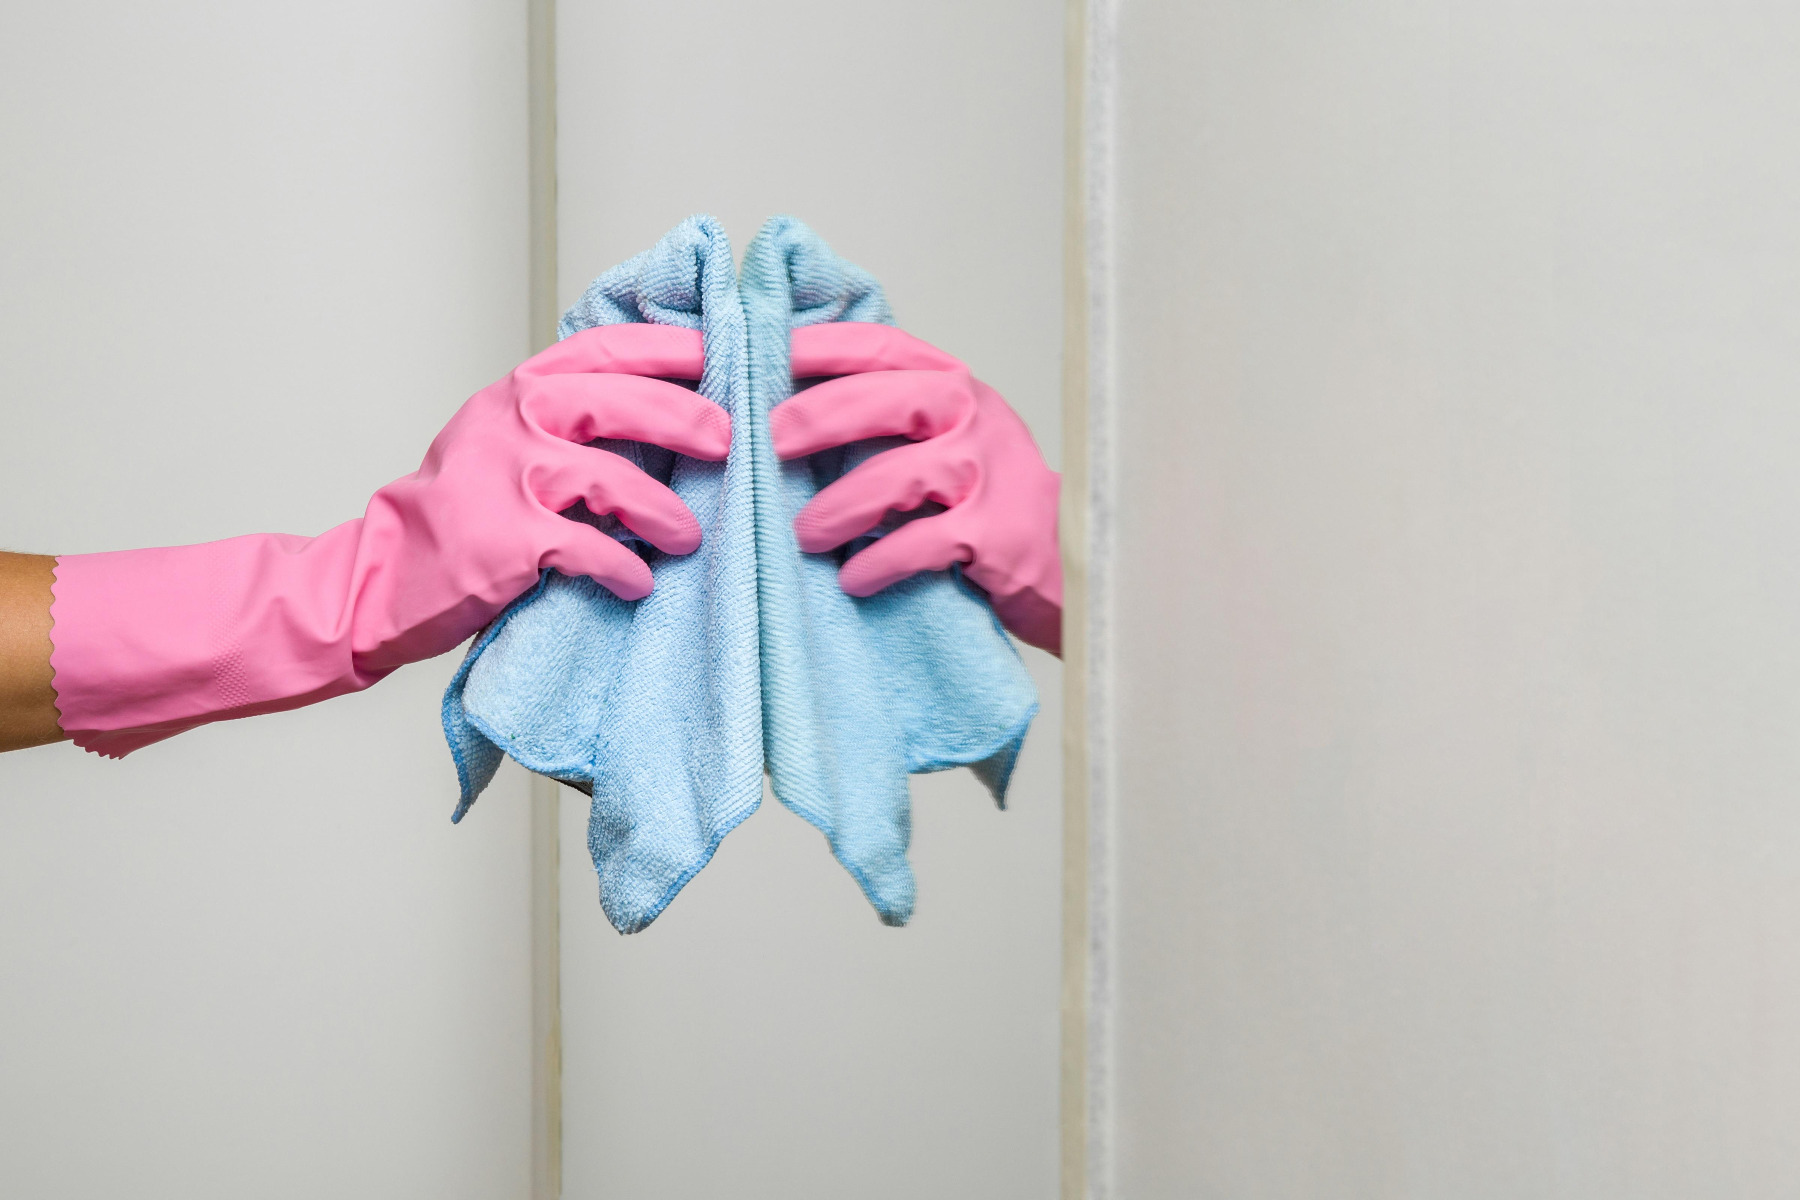 cleaning with glove and cloth